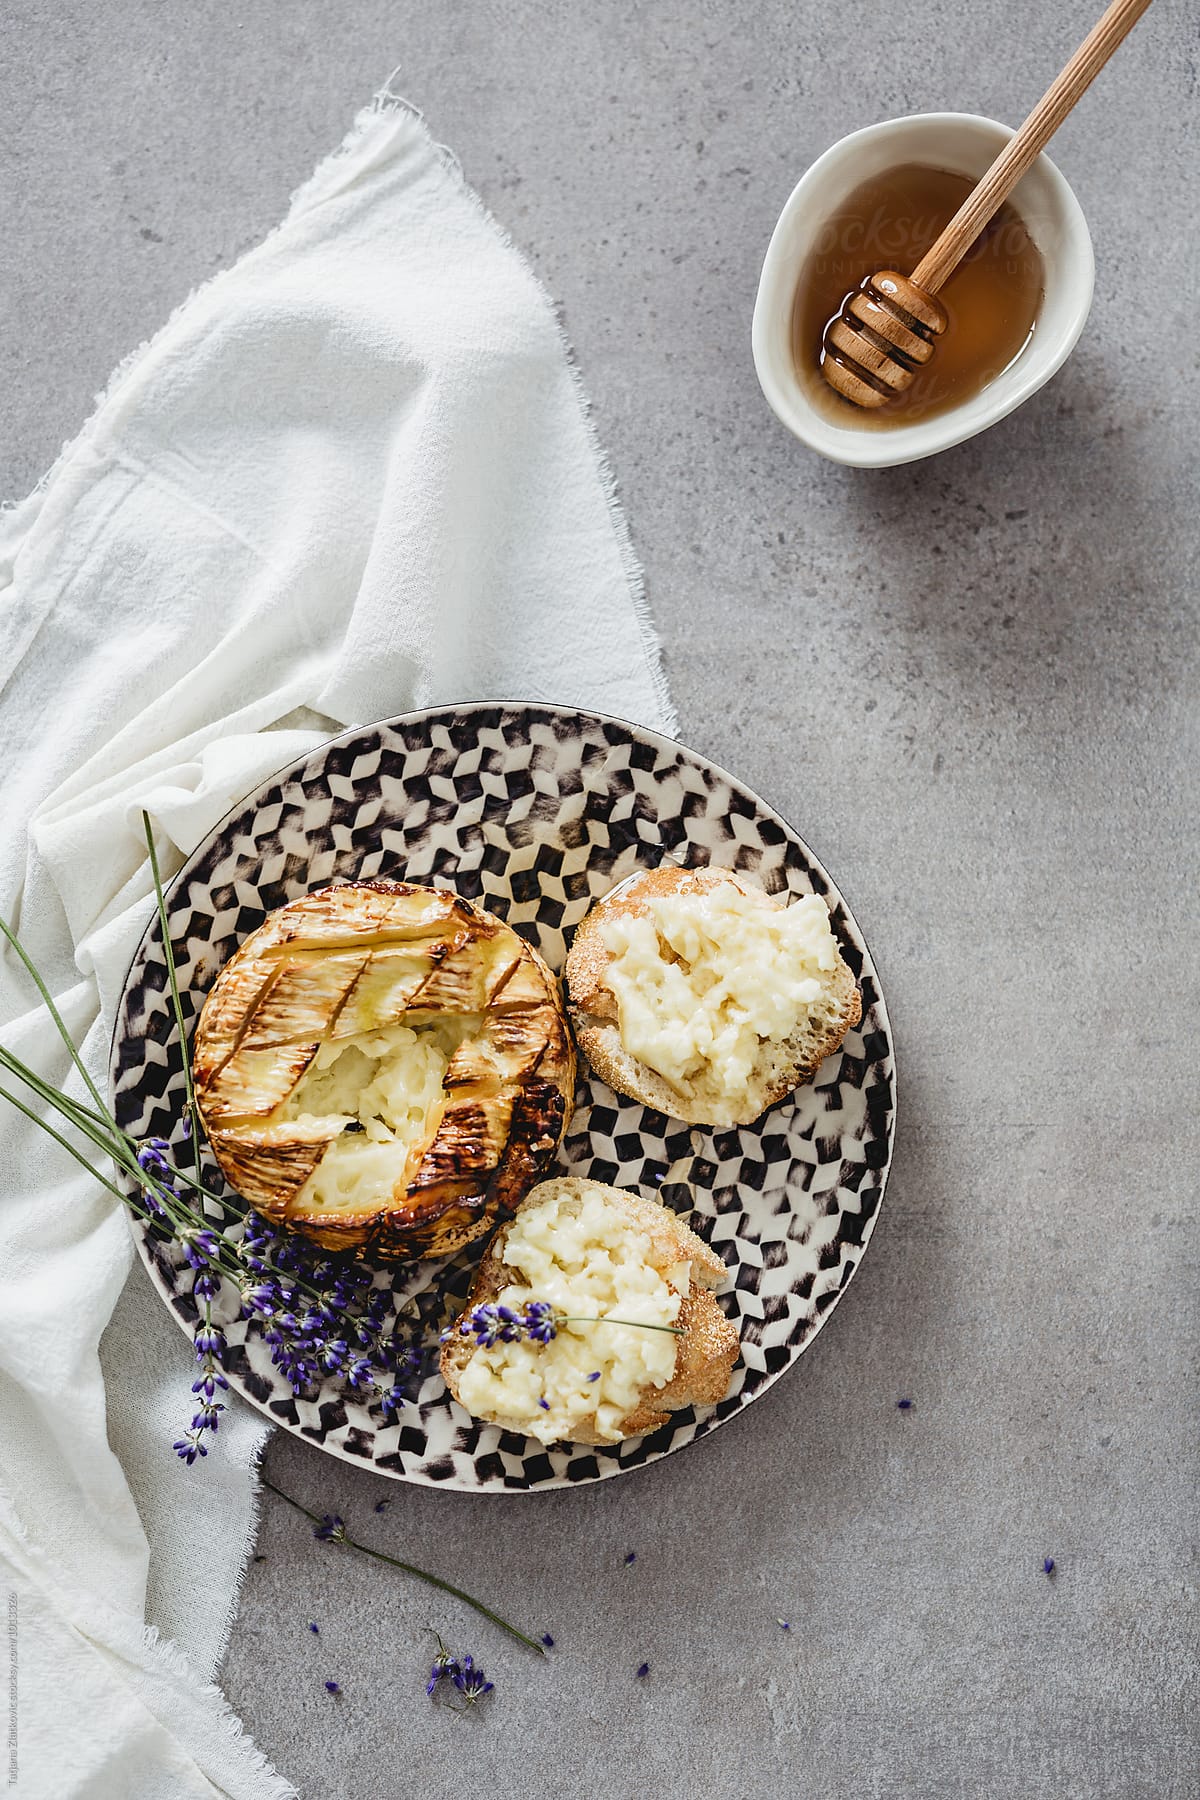 Baked camembert with honey and lavender